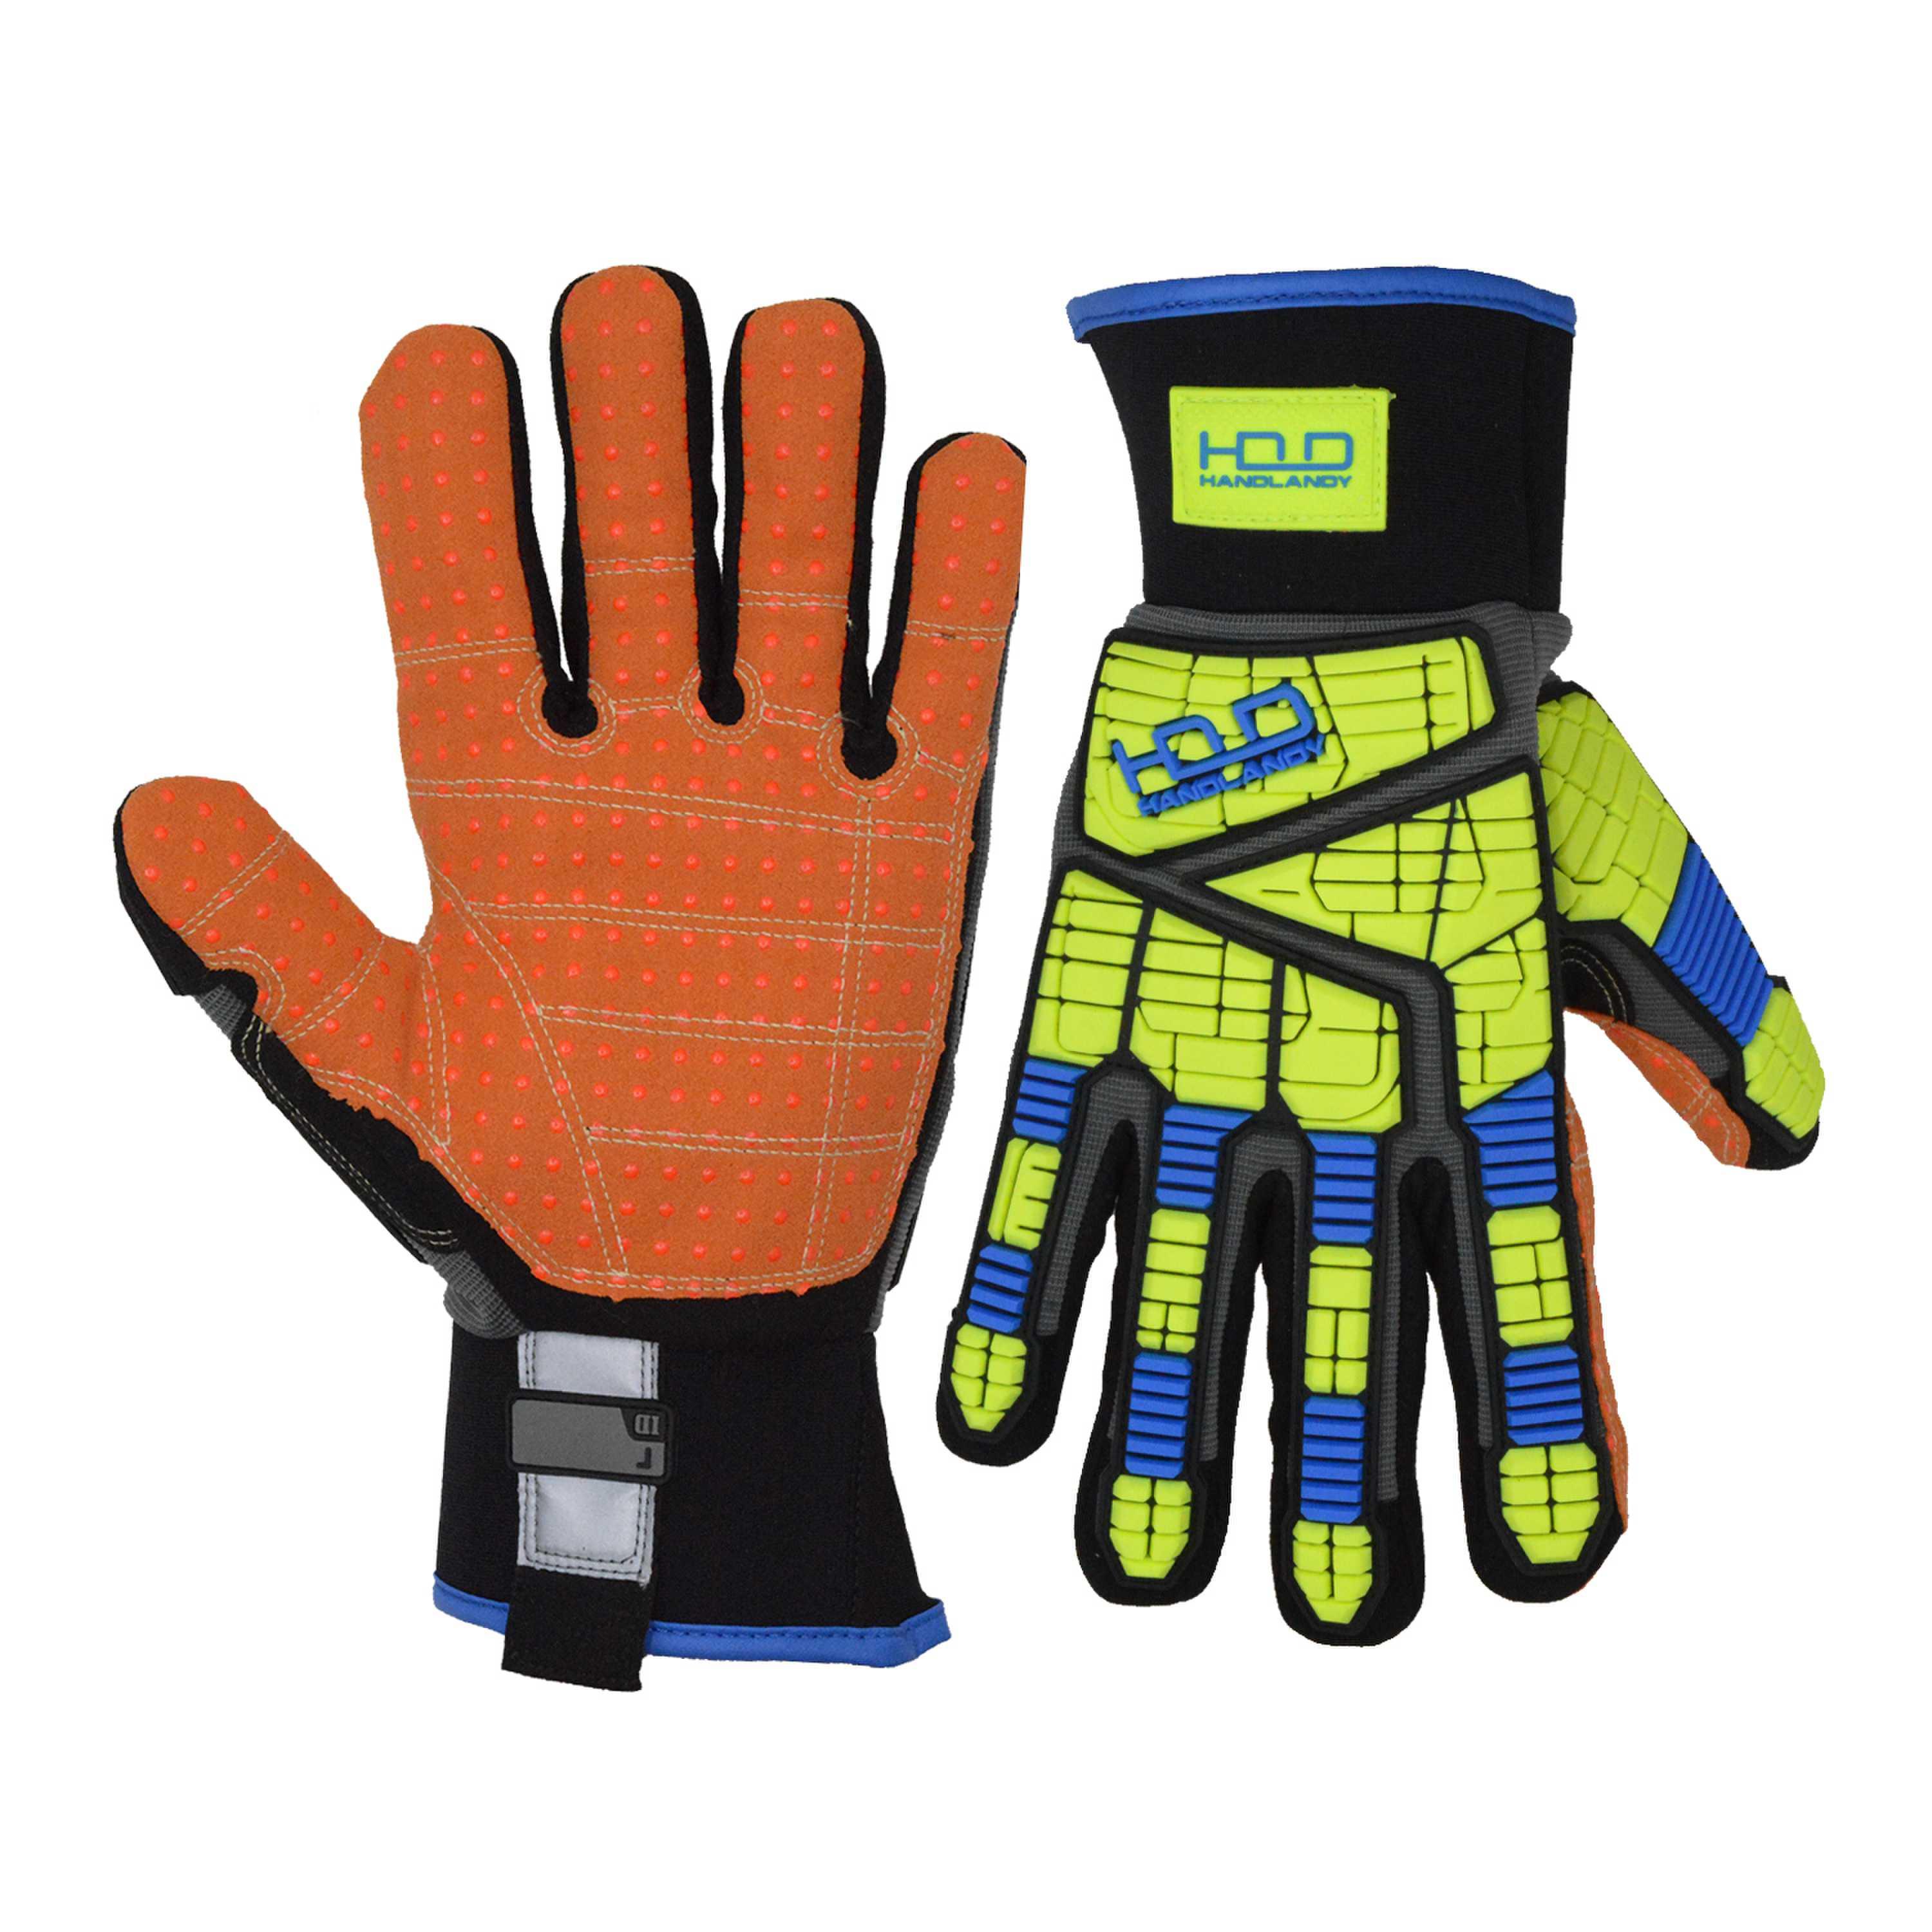 H670 PRISAFETY colorful synthetic palm silicon dotting gloves manufacturer,TPR anti-impact work grip gloves